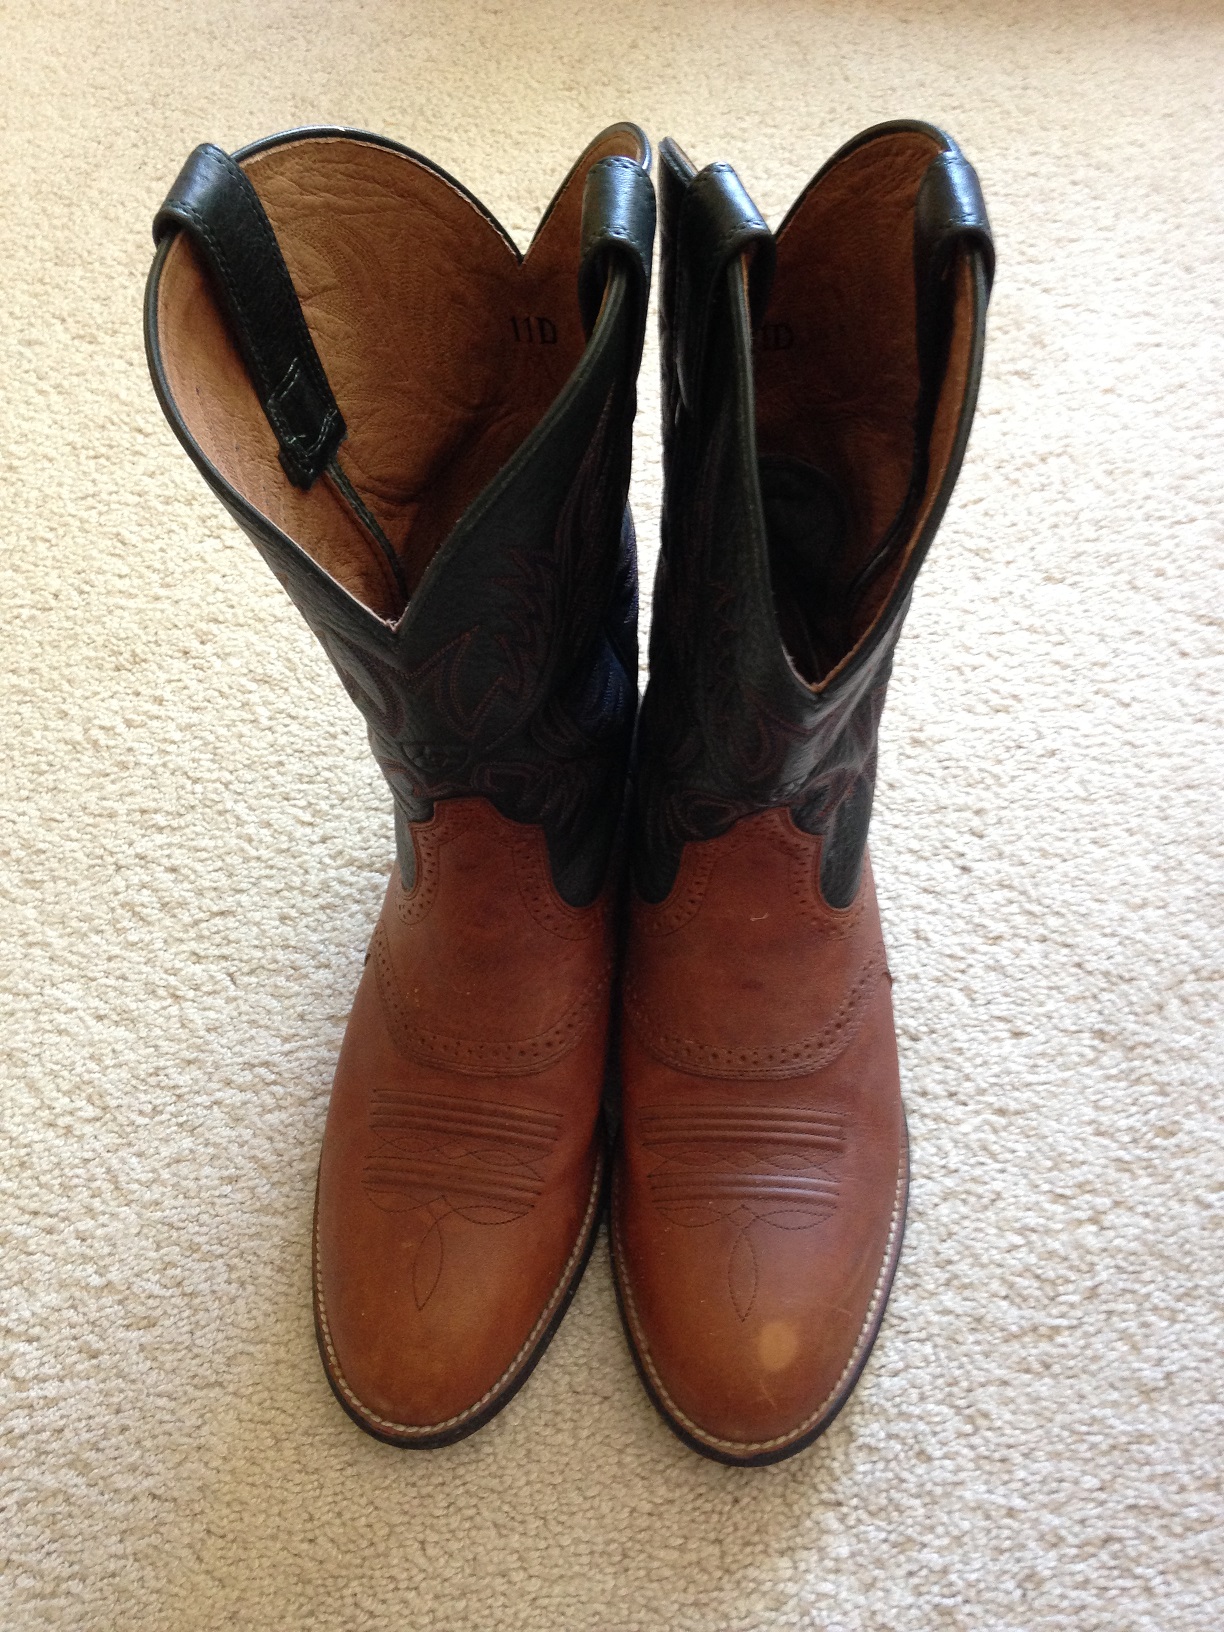 Used Mens  Ariat  Leather Western Cowboy Boots Size US 11...